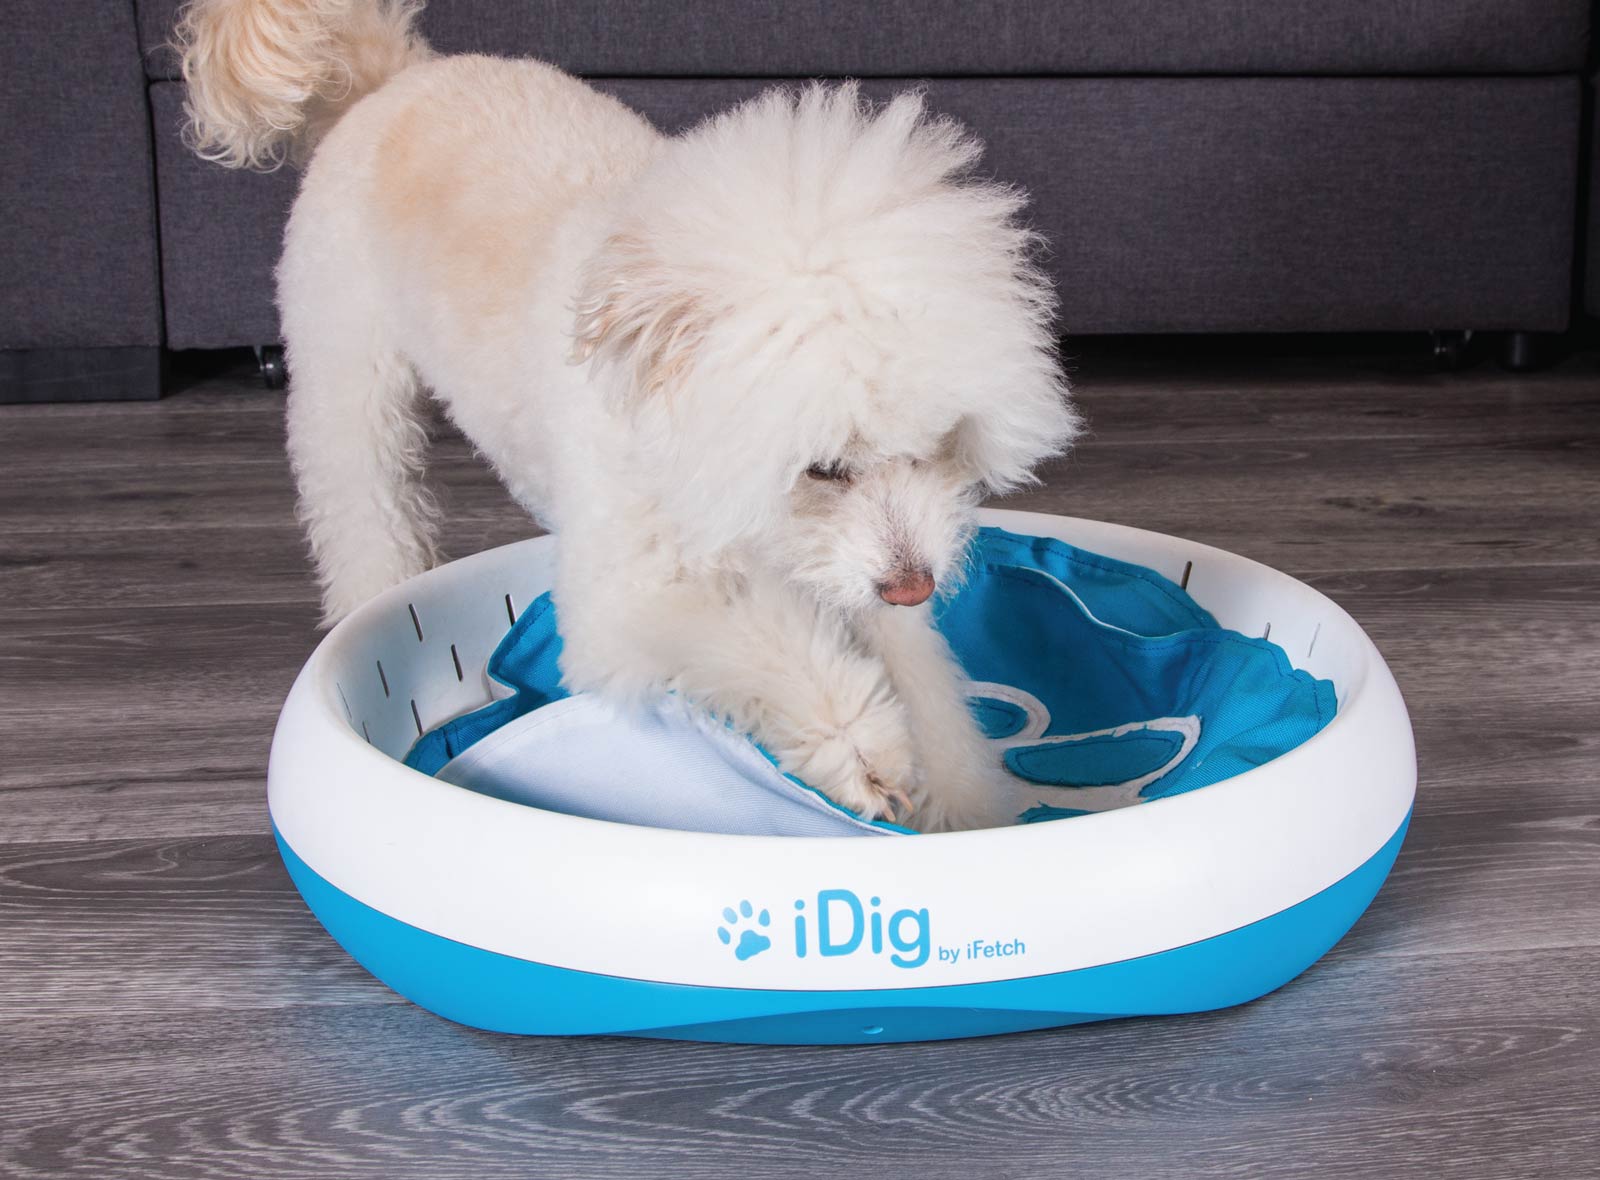 Buy iFetch iDig Digging Toy for Dogs - Stay online Worldwide